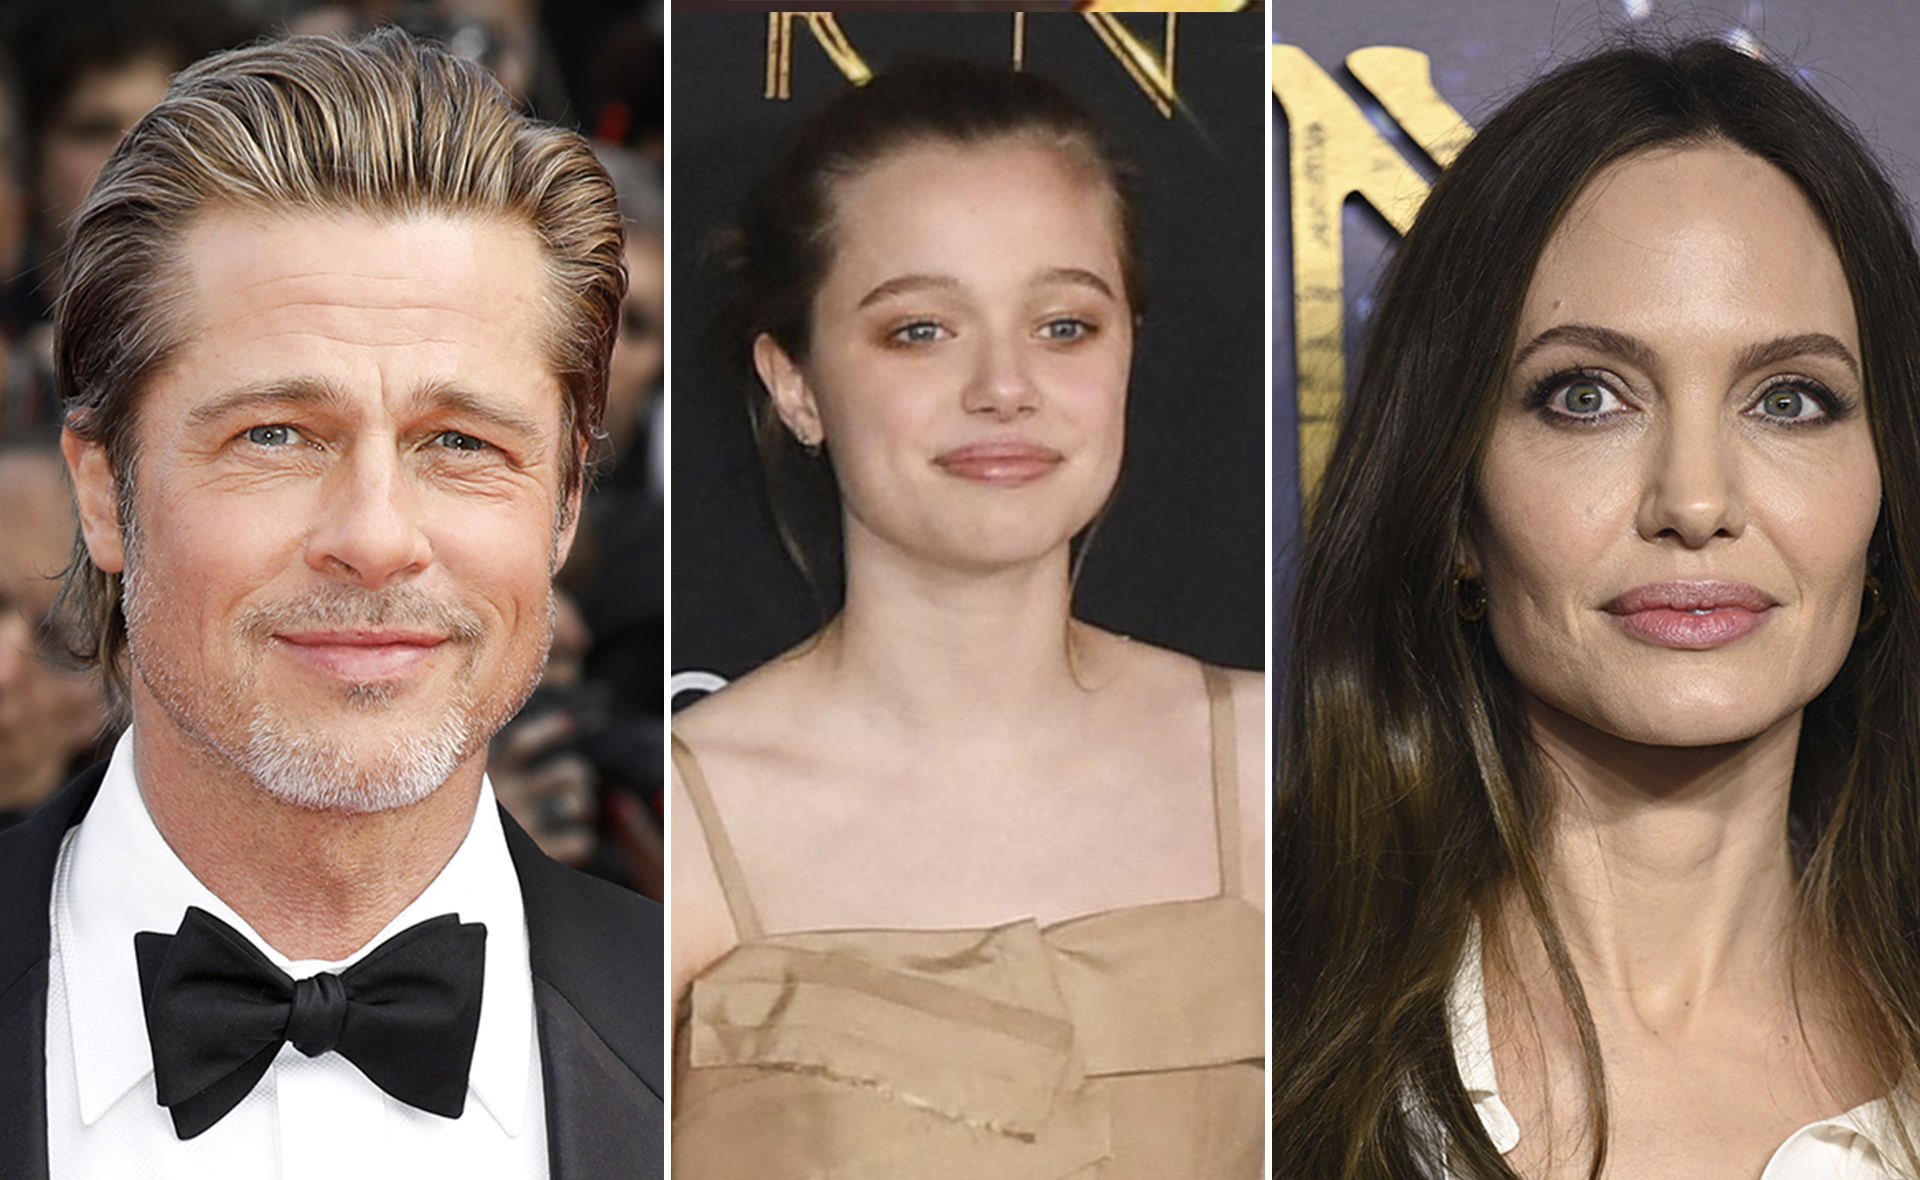 Shiloh Jolie Pitt is the perfect combination of her famous parents Brad and Angelina – but who does she look more like?